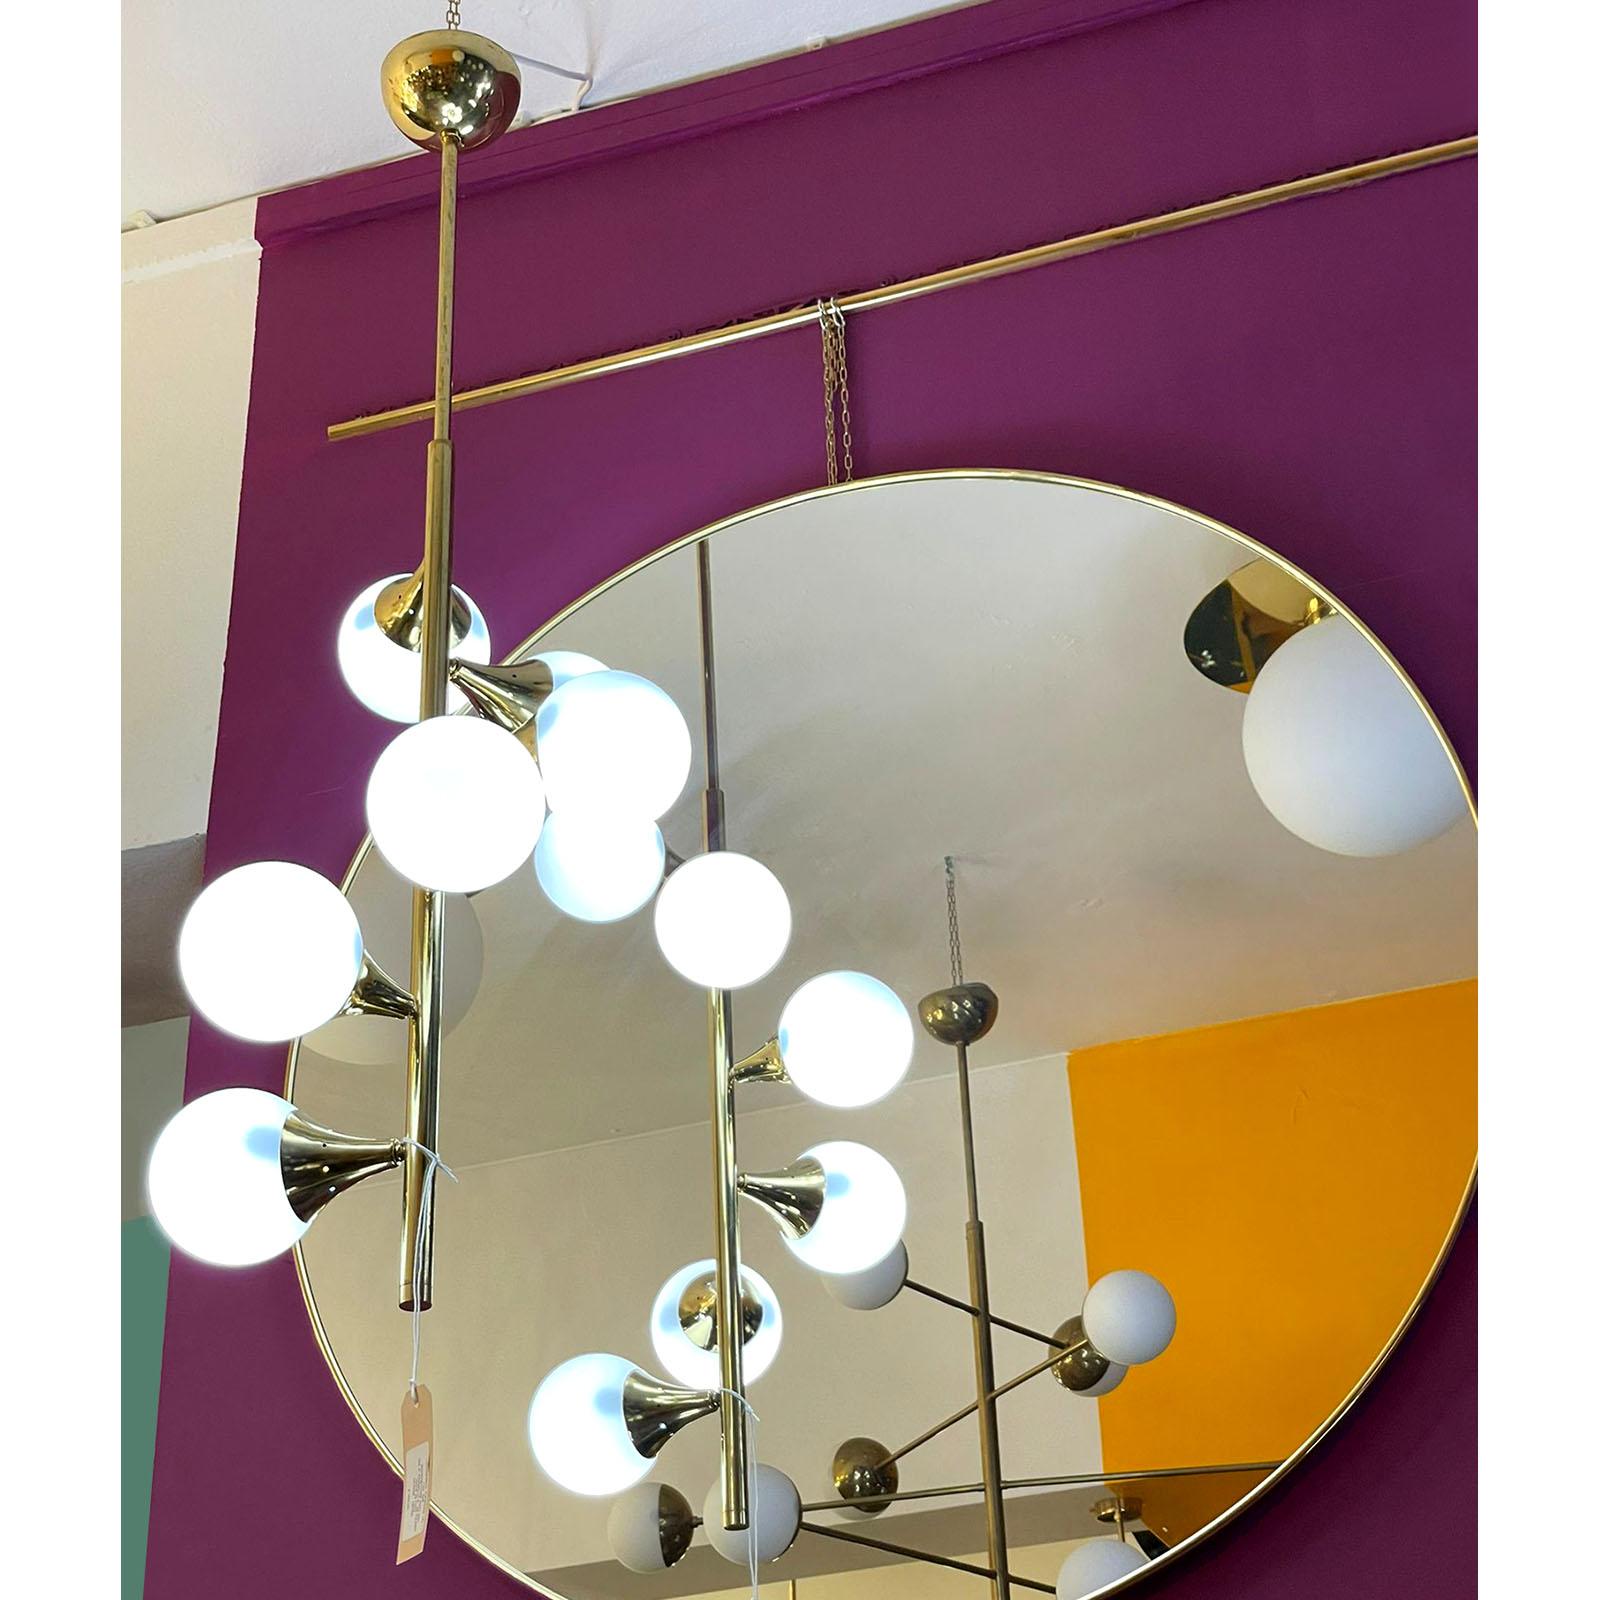 Six light mid century Stilnovo style chandelier featuring a brass pole shaped body onto which are attached, in a swirling pattern, brass light sources which hold white glass globe light diffusing shades.

Dimensions: Diameter 34 cm; Height 115 cm;